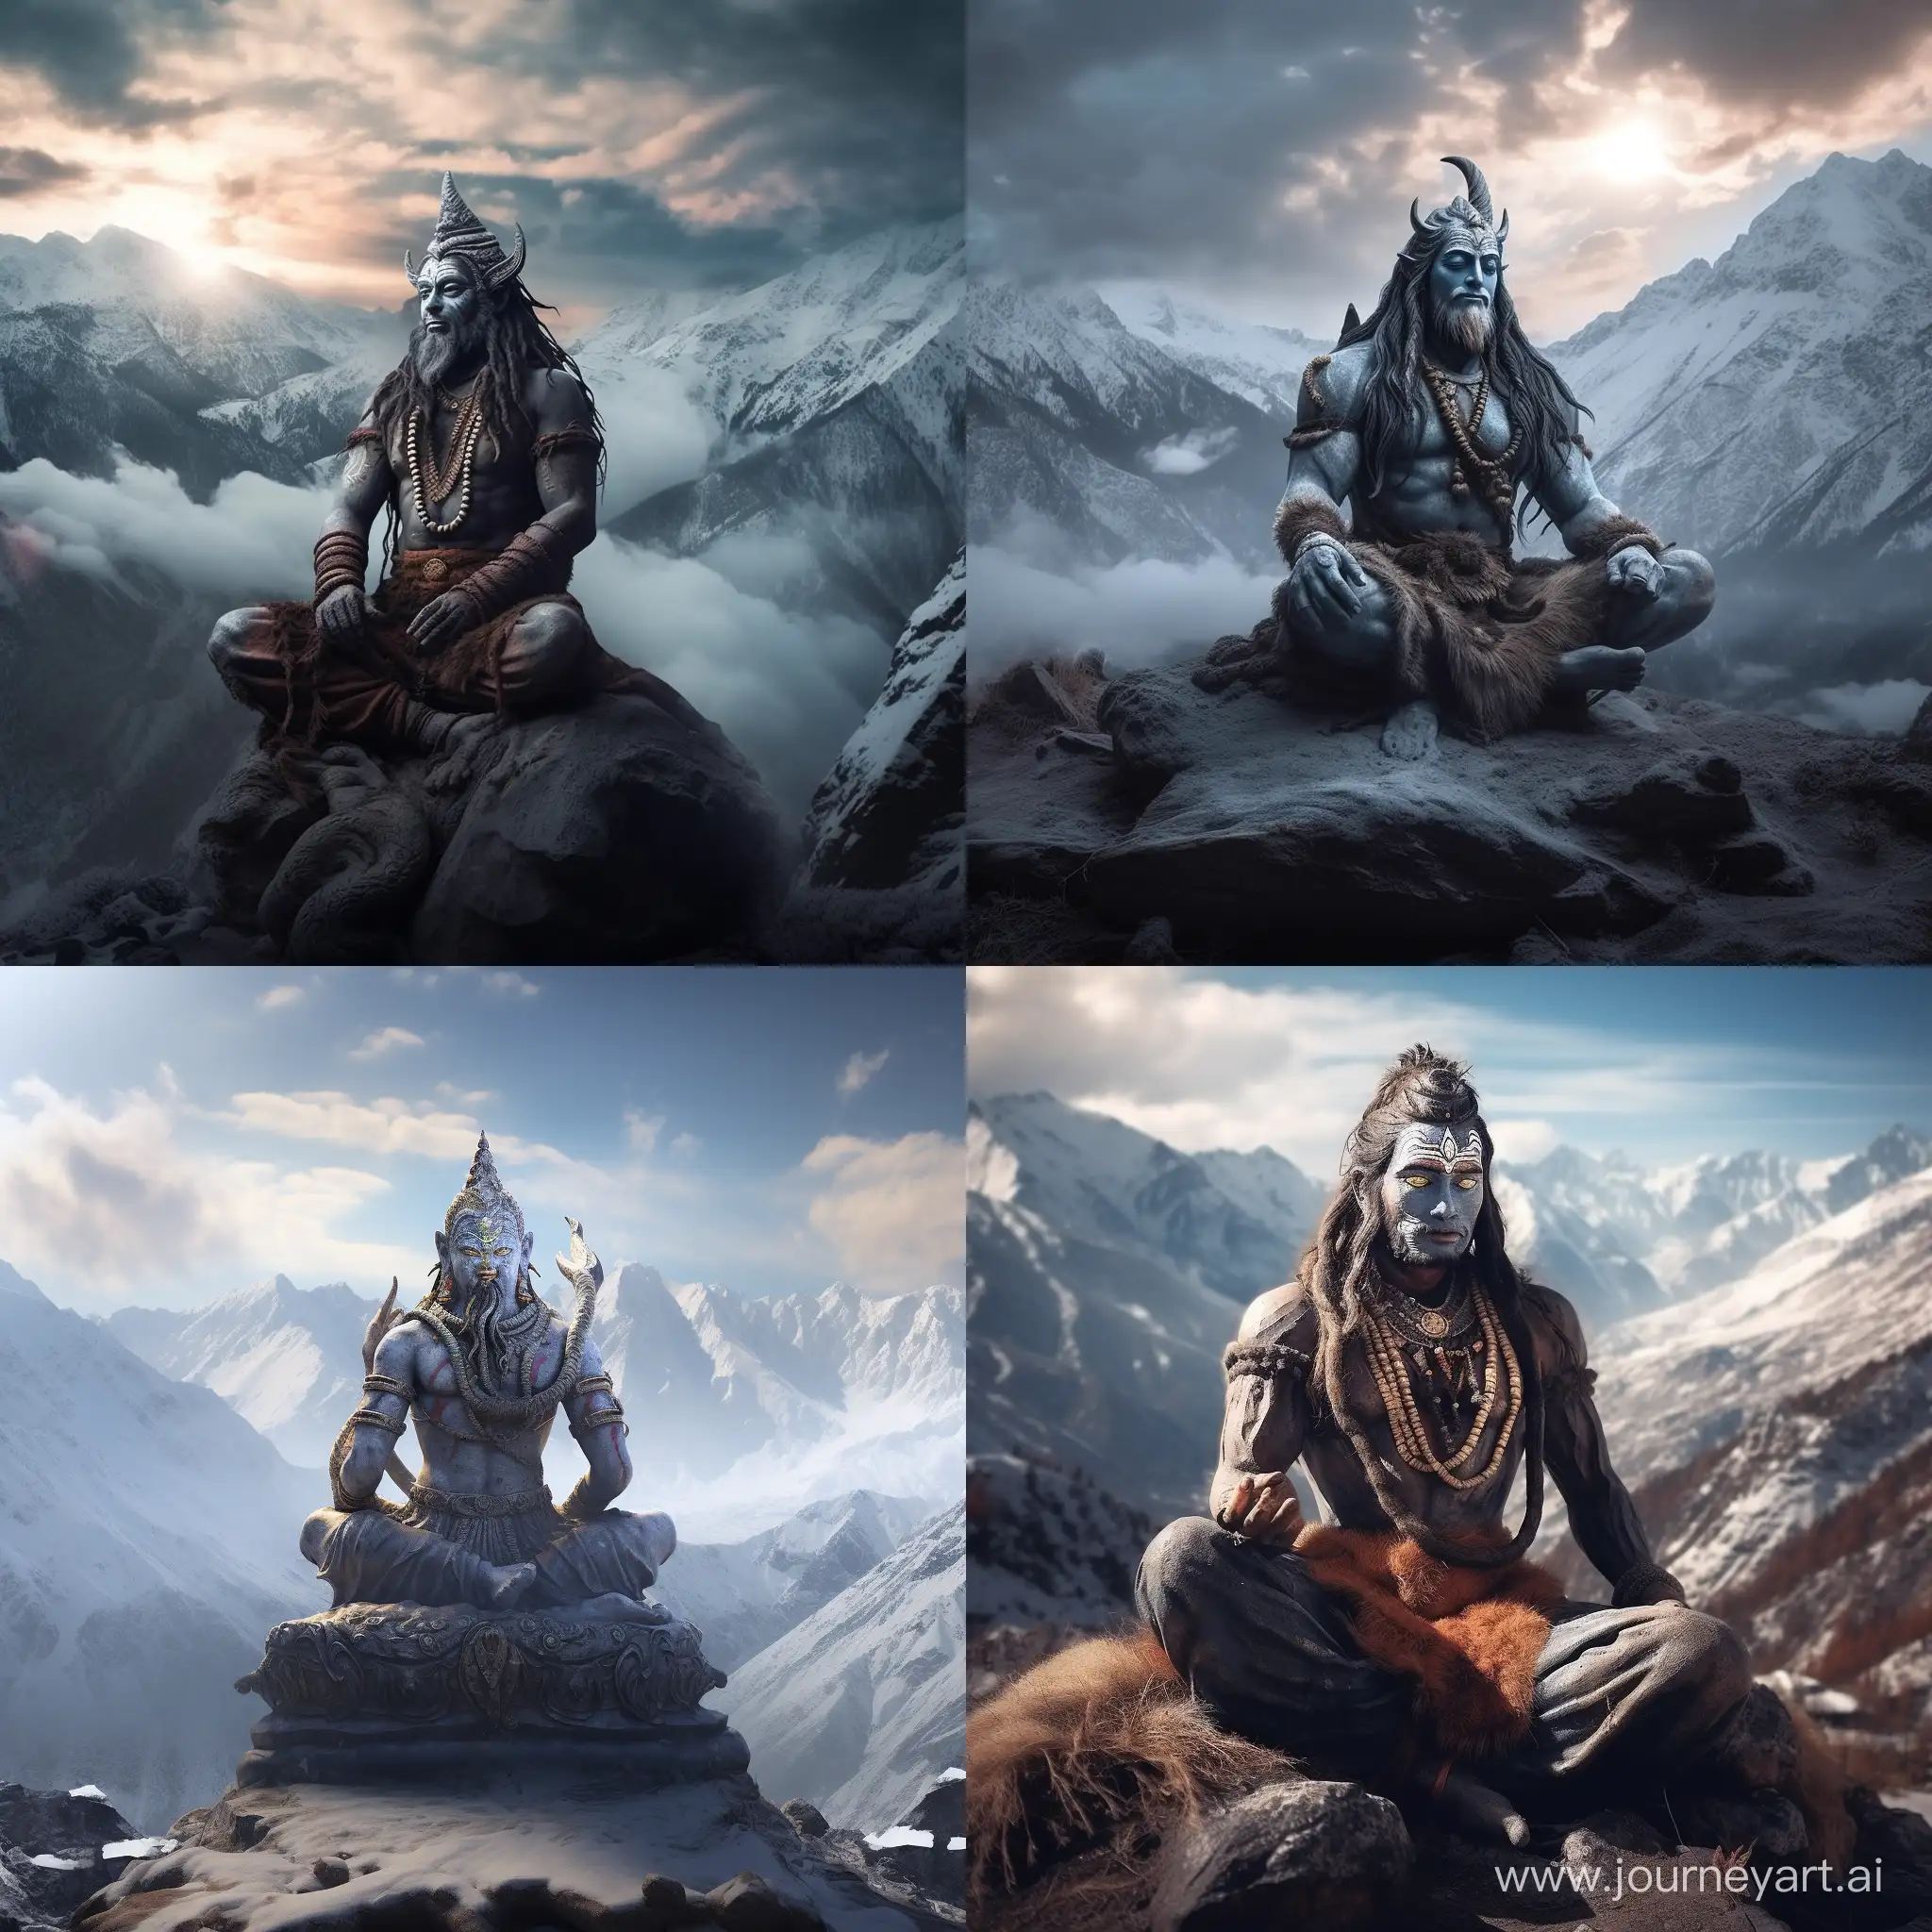 Lord-Shiva-Mahadev-Serenely-Observing-Earth-from-Mount-Everest